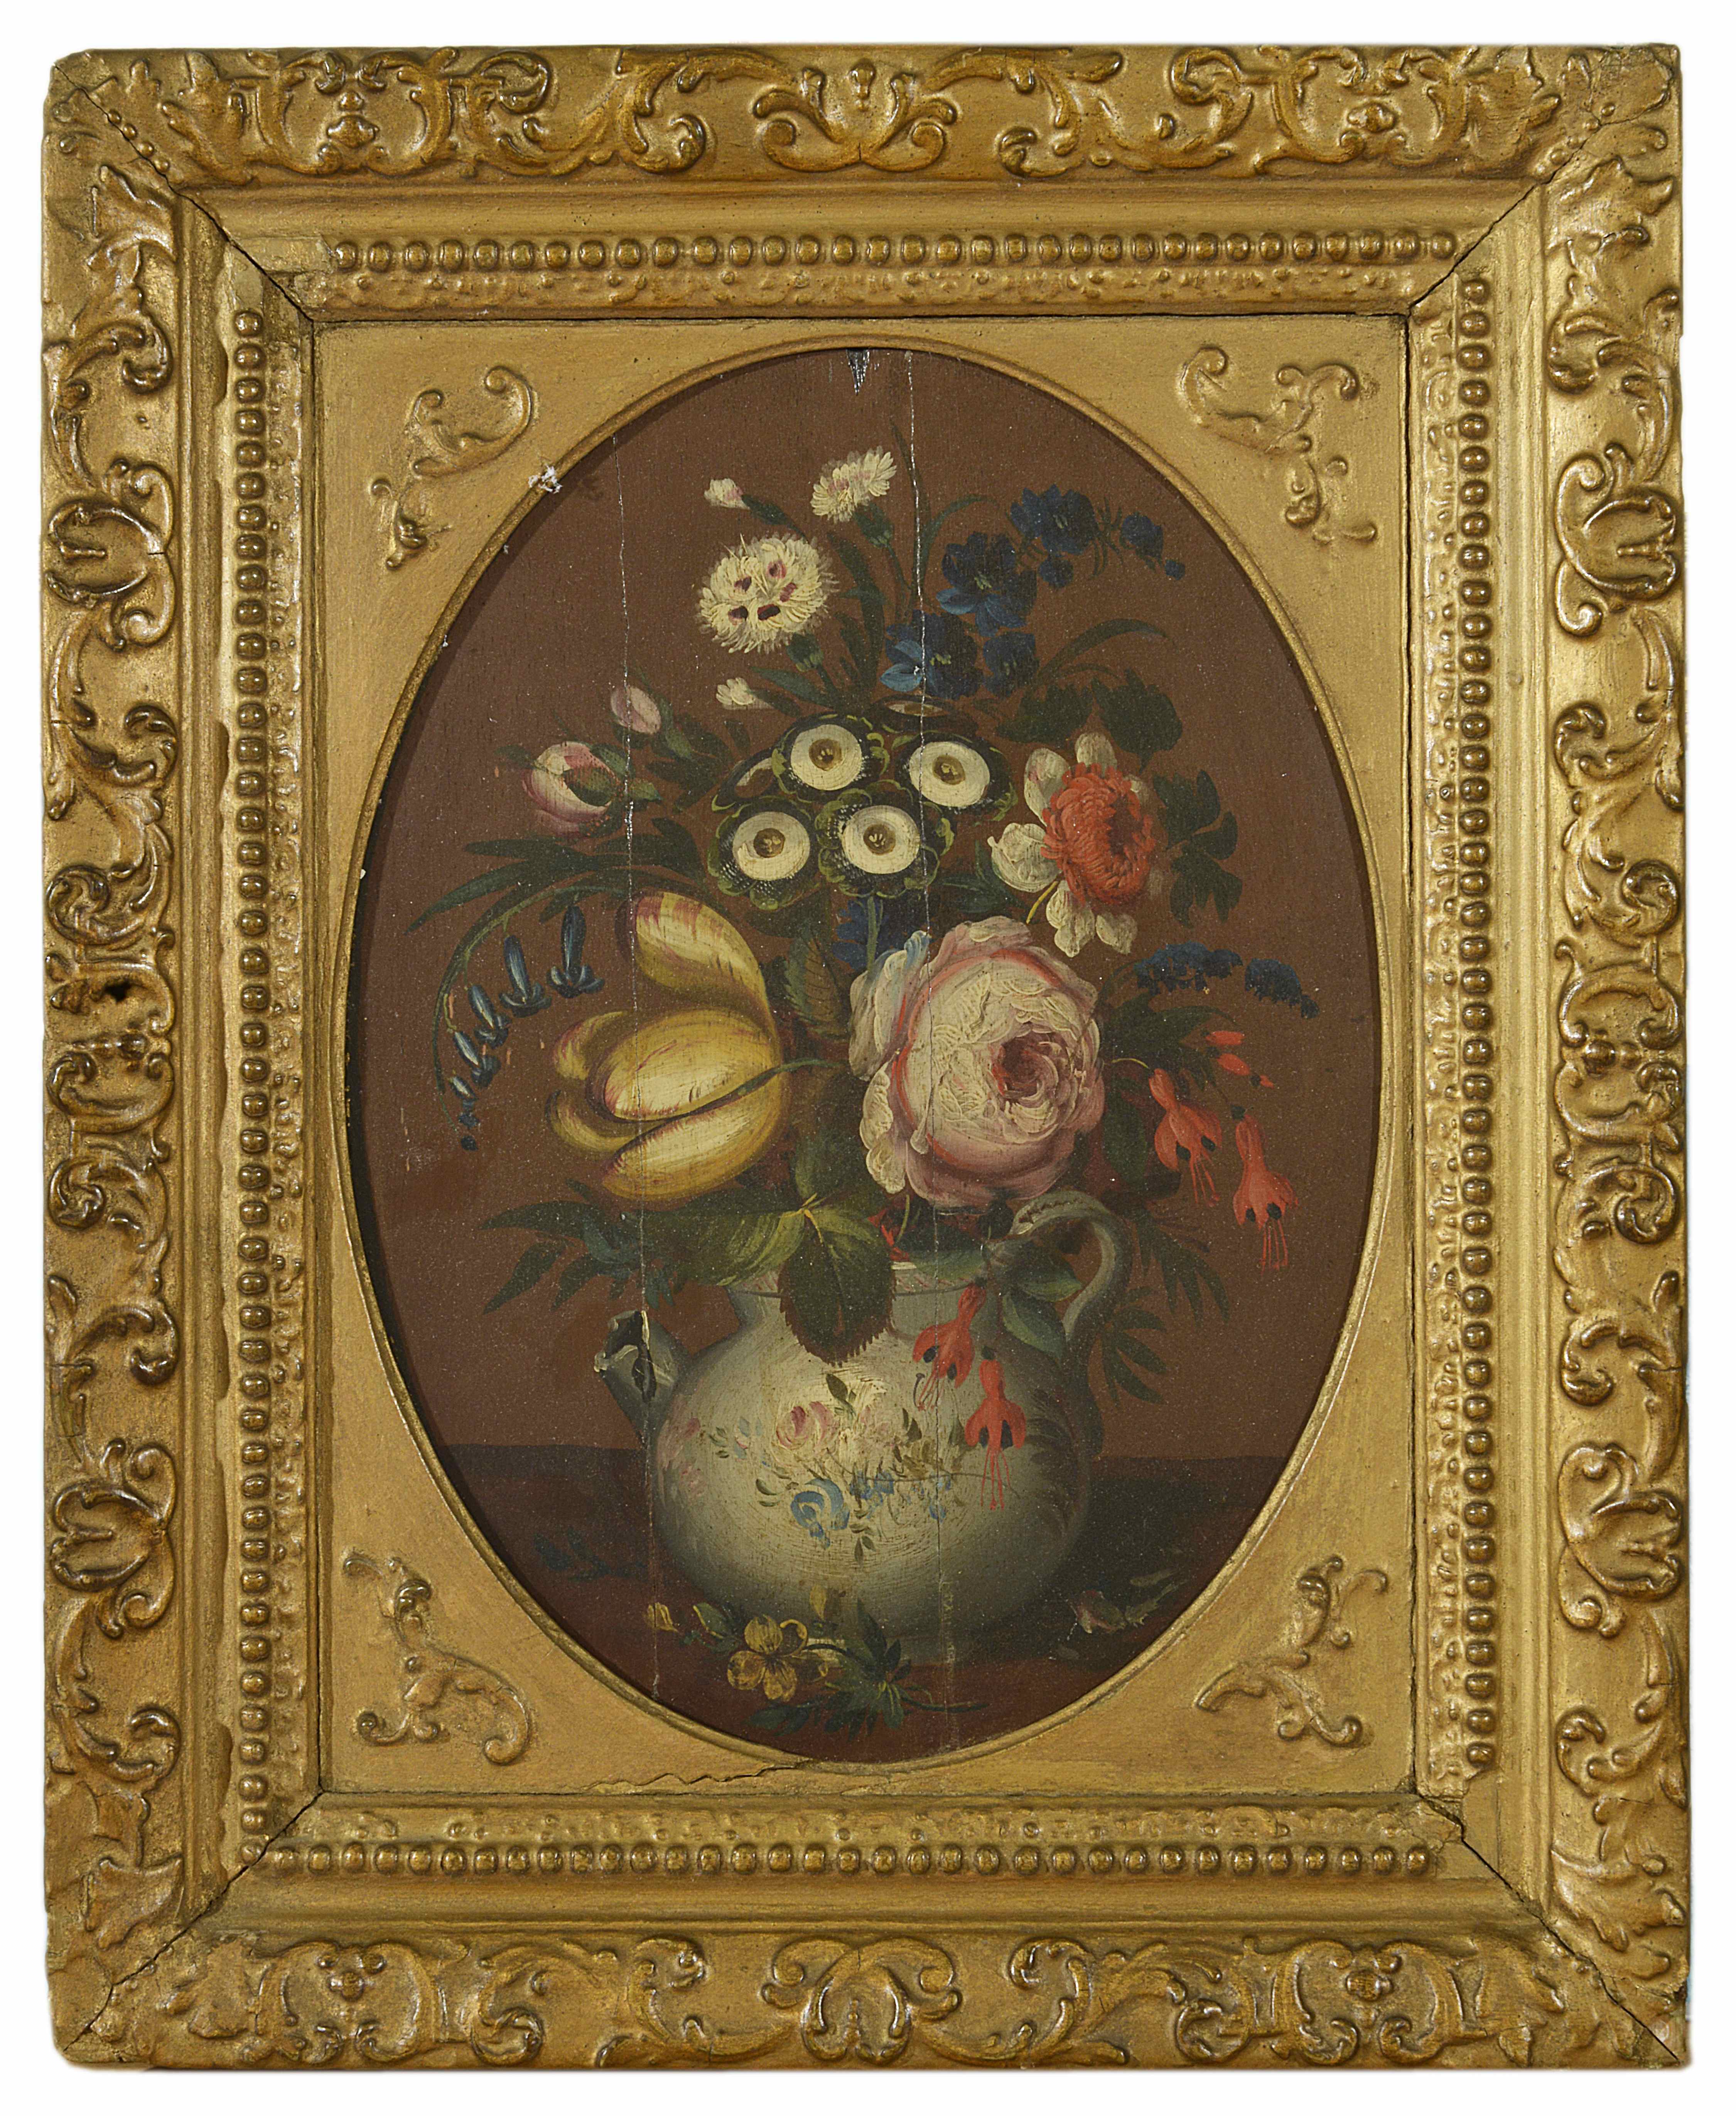 A Continental still life scene of a jug with flowers, the oval shaped panel depicting a jug